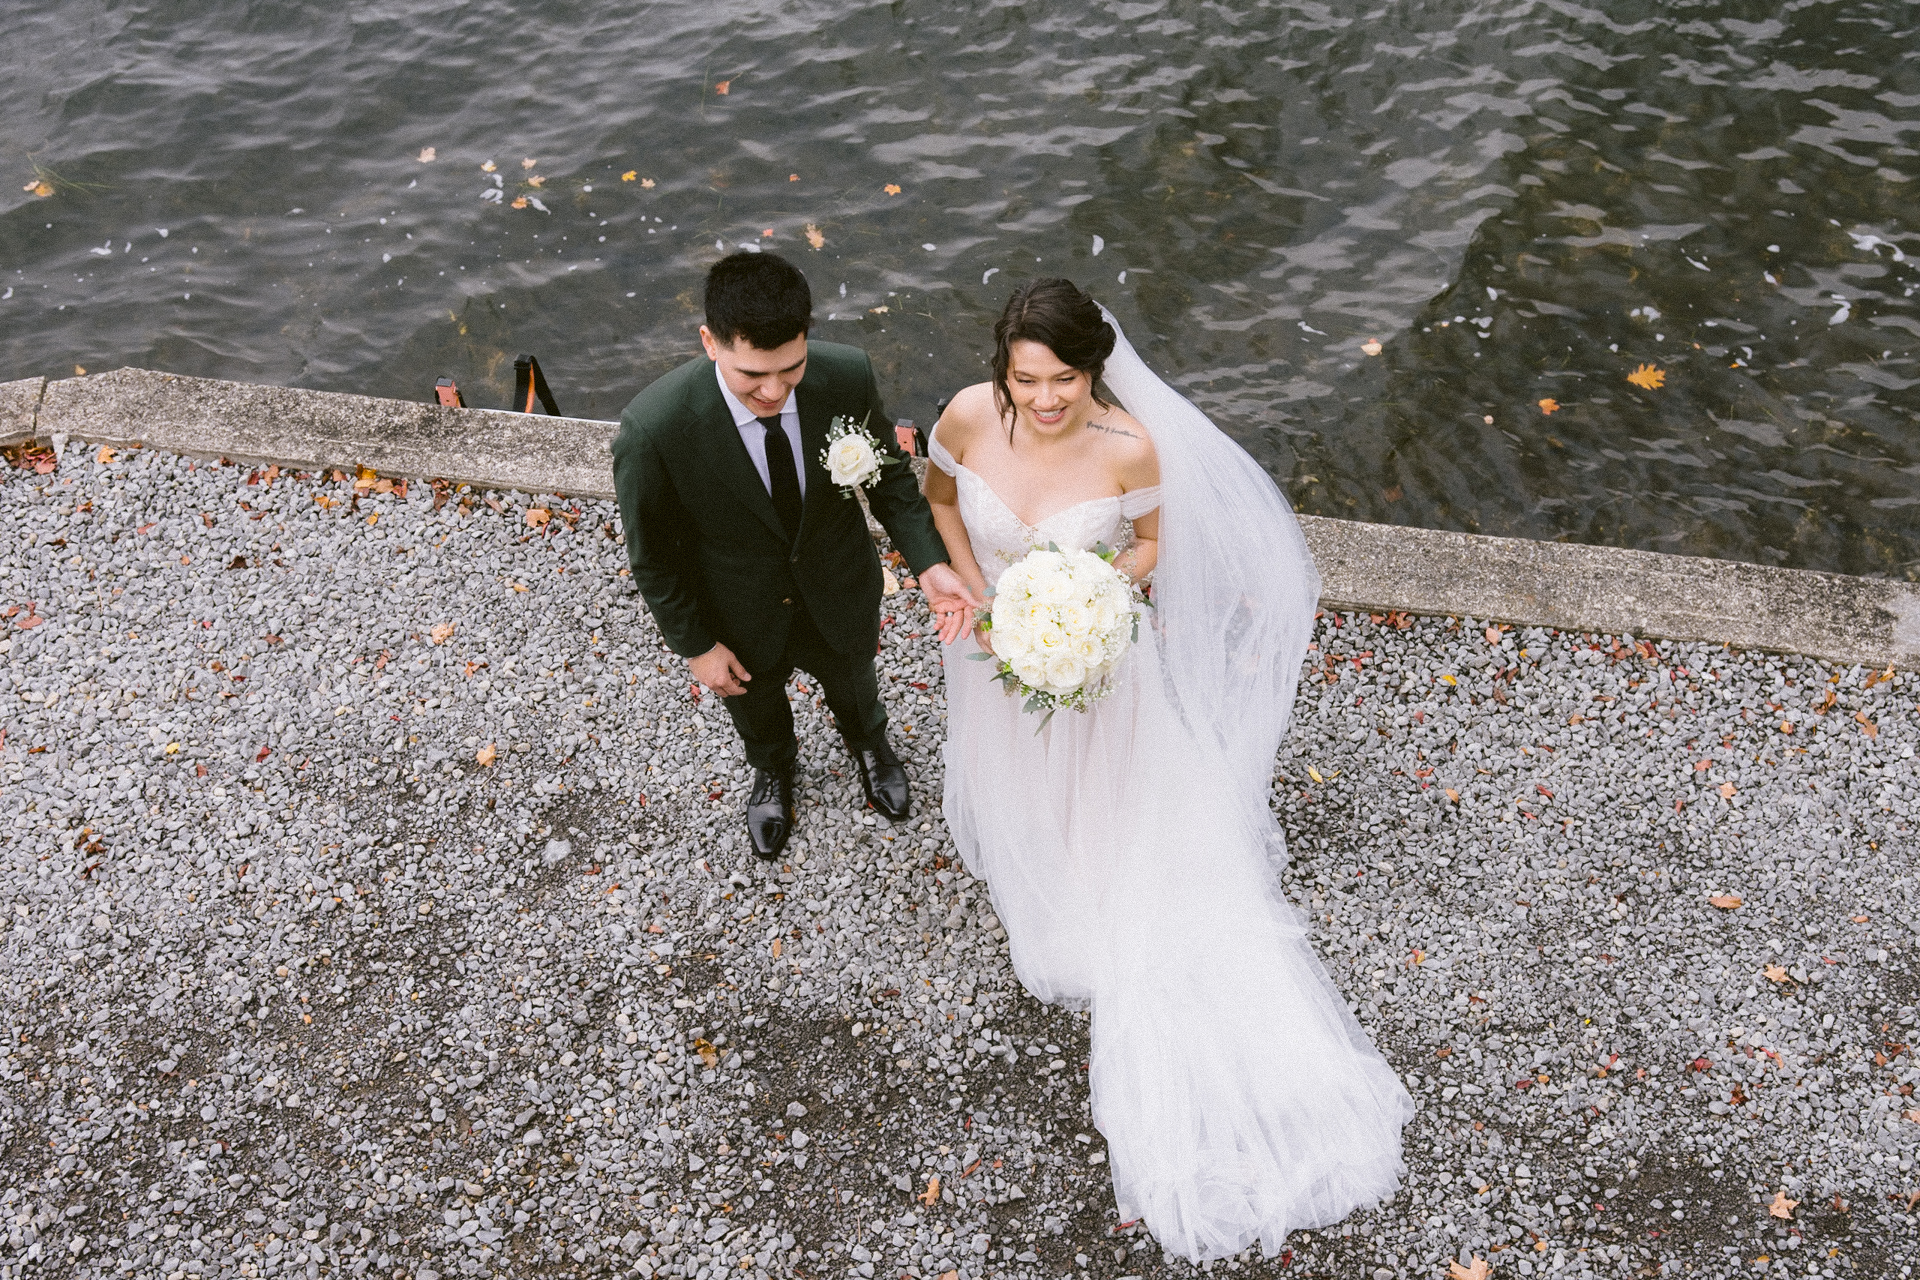 A just-married couple walking hand-in-hand along a pebbled lakeshore.